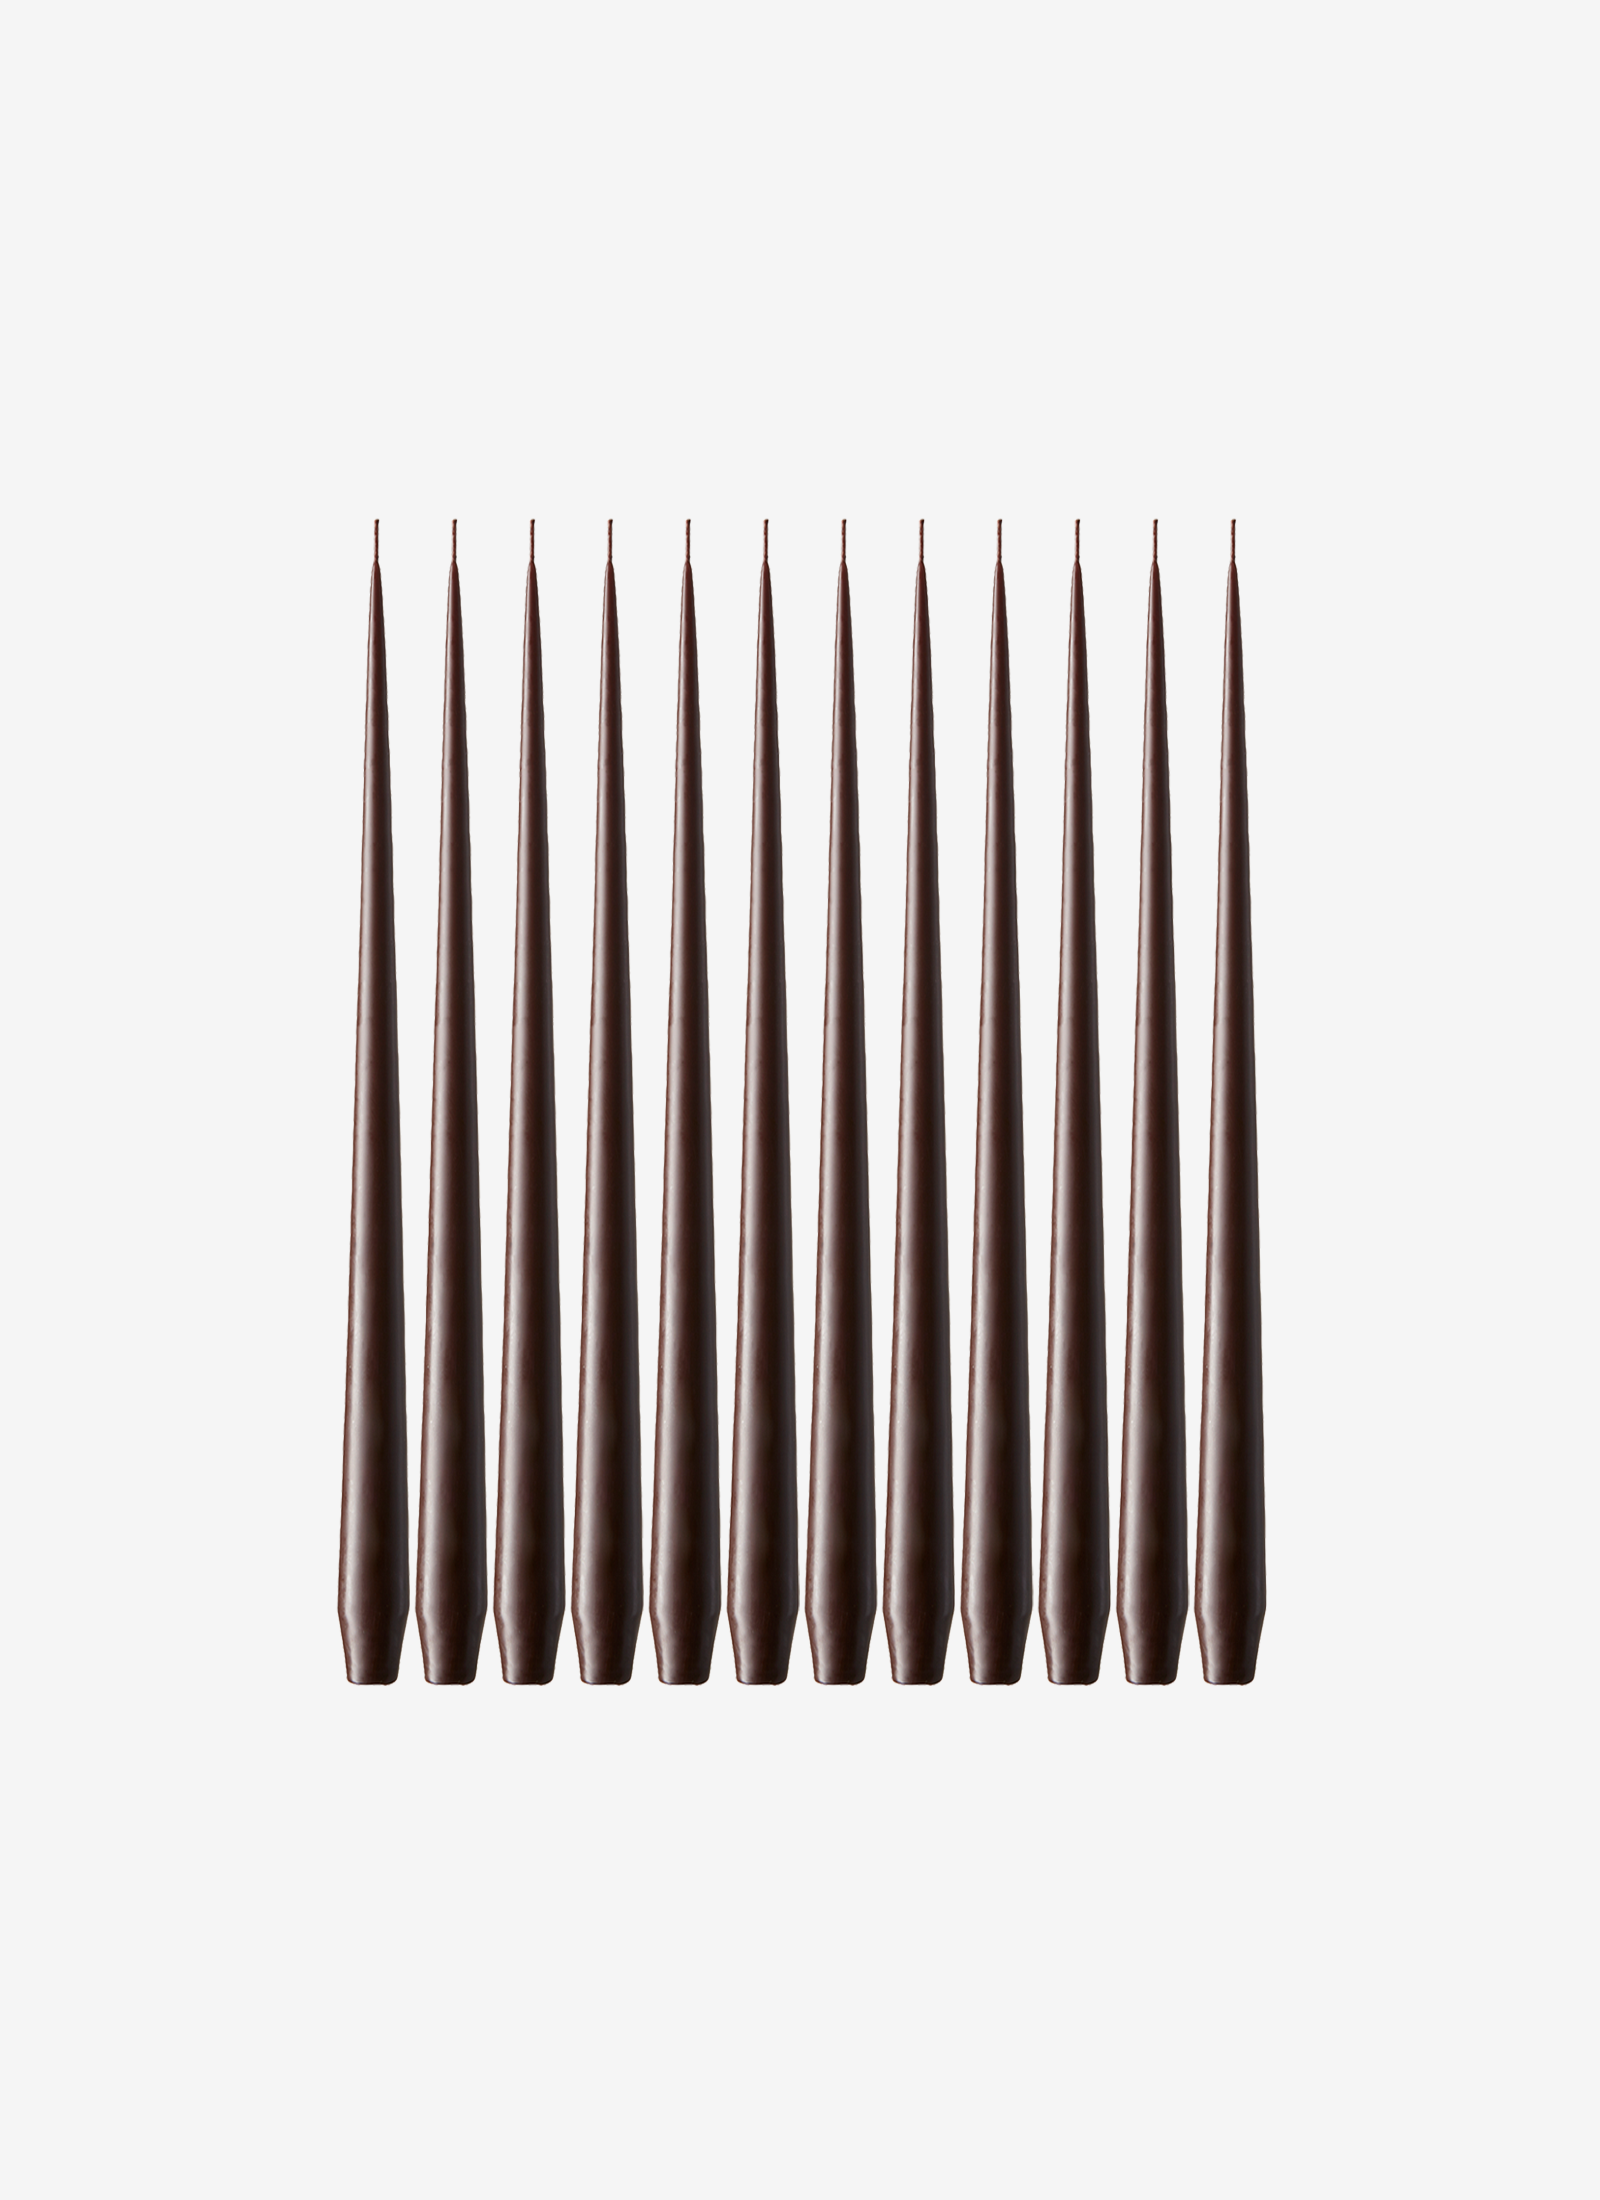 Case of 12 Tapered Candles in Espresso #79 - 42cm